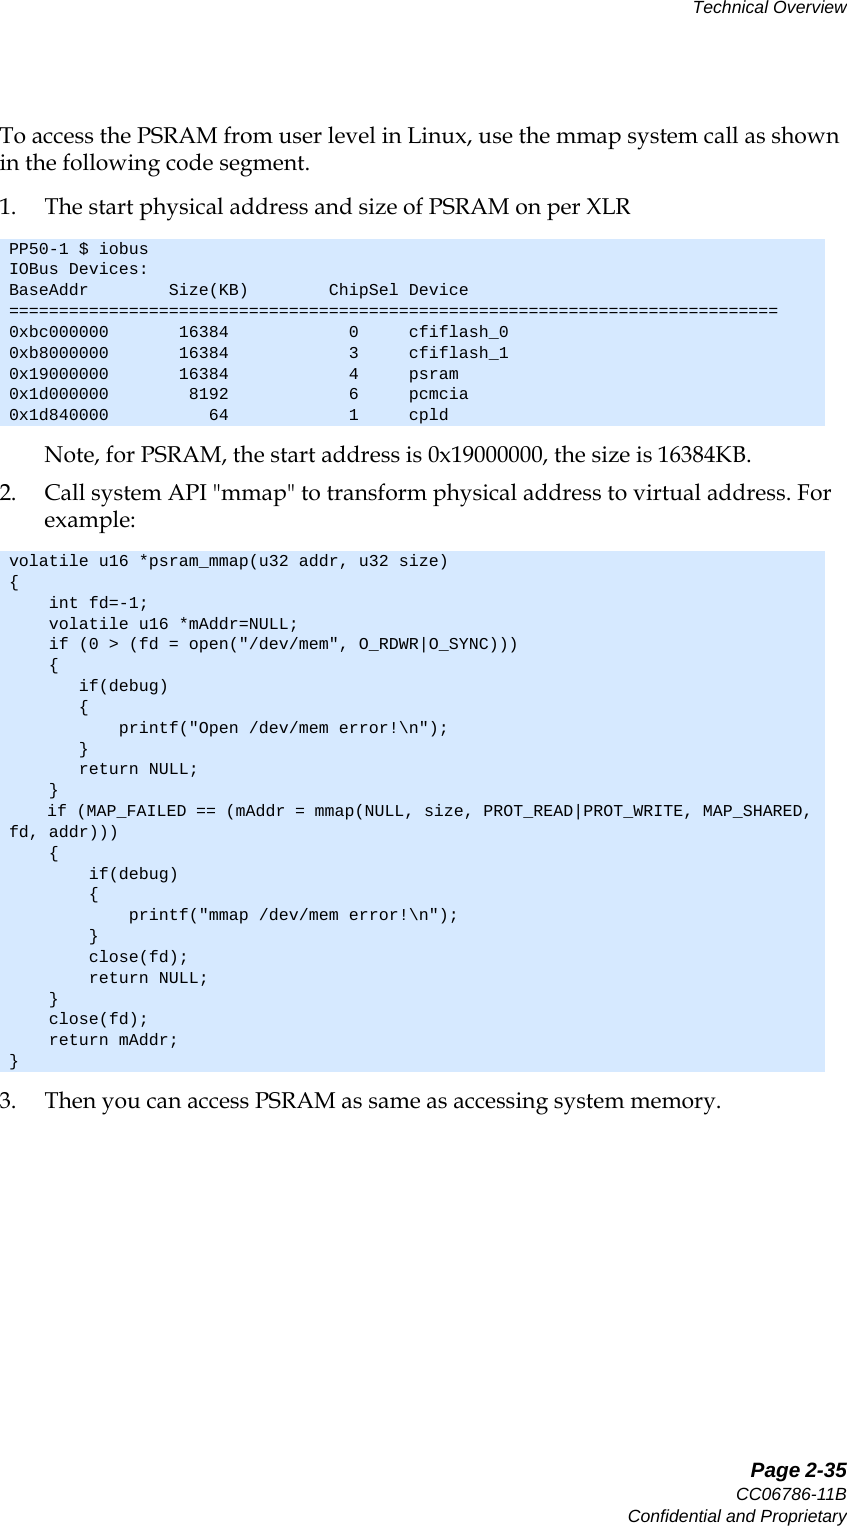   Page 2-35CC06786-11BConfidential and ProprietaryTechnical Overview14ABABPreliminaryTo access the PSRAM from user level in Linux, use the mmap system call as shown in the following code segment.1. The start physical address and size of PSRAM on per XLRNote, for PSRAM, the start address is 0x19000000, the size is 16384KB.2. Call system API &quot;mmap&quot; to transform physical address to virtual address. For example:3. Then you can access PSRAM as same as accessing system memory.PP50-1 $ iobusIOBus Devices:BaseAddr        Size(KB)        ChipSel Device=============================================================================0xbc000000       16384            0     cfiflash_00xb8000000       16384            3     cfiflash_10x19000000       16384            4     psram0x1d000000        8192            6     pcmcia0x1d840000          64            1     cpldvolatile u16 *psram_mmap(u32 addr, u32 size){    int fd=-1;    volatile u16 *mAddr=NULL;    if (0 &gt; (fd = open(&quot;/dev/mem&quot;, O_RDWR|O_SYNC)))    {       if(debug)       {           printf(&quot;Open /dev/mem error!\n&quot;);       }       return NULL;    }    if (MAP_FAILED == (mAddr = mmap(NULL, size, PROT_READ|PROT_WRITE, MAP_SHARED, fd, addr)))    {        if(debug)        {            printf(&quot;mmap /dev/mem error!\n&quot;);        }        close(fd);        return NULL;    }    close(fd);    return mAddr;}